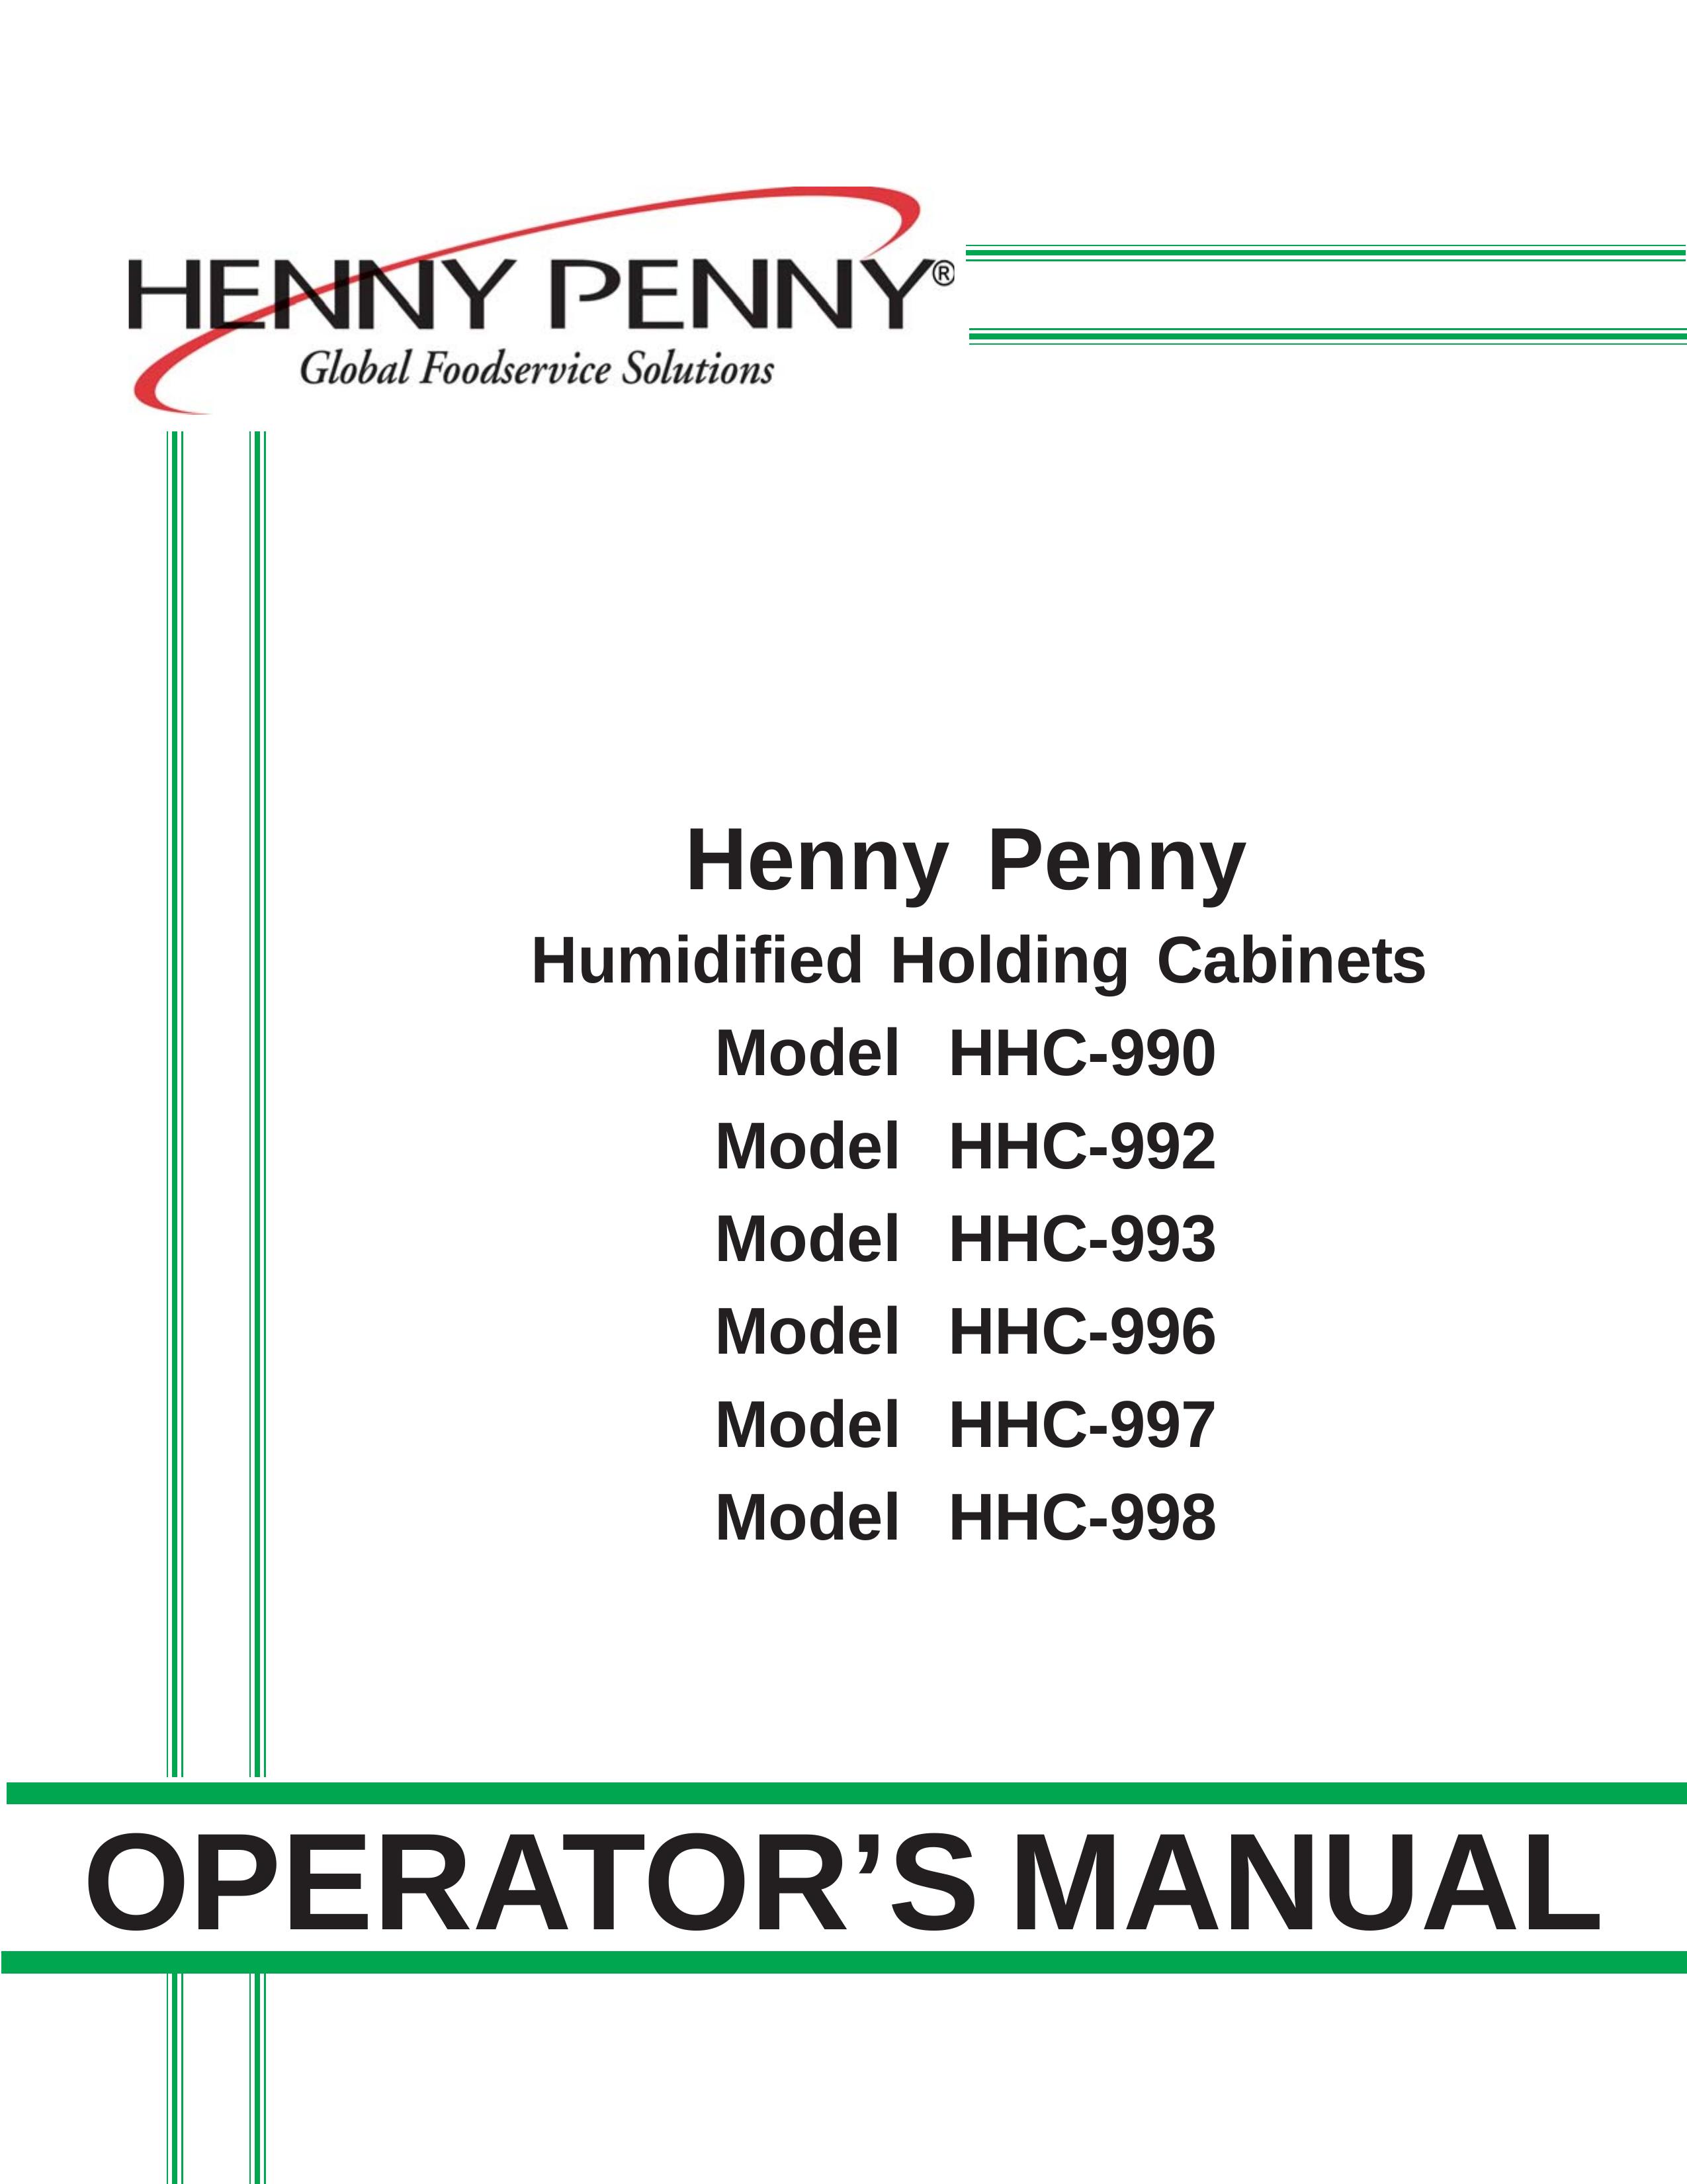 Henny Penny HHC-996 Clothes Dryer User Manual